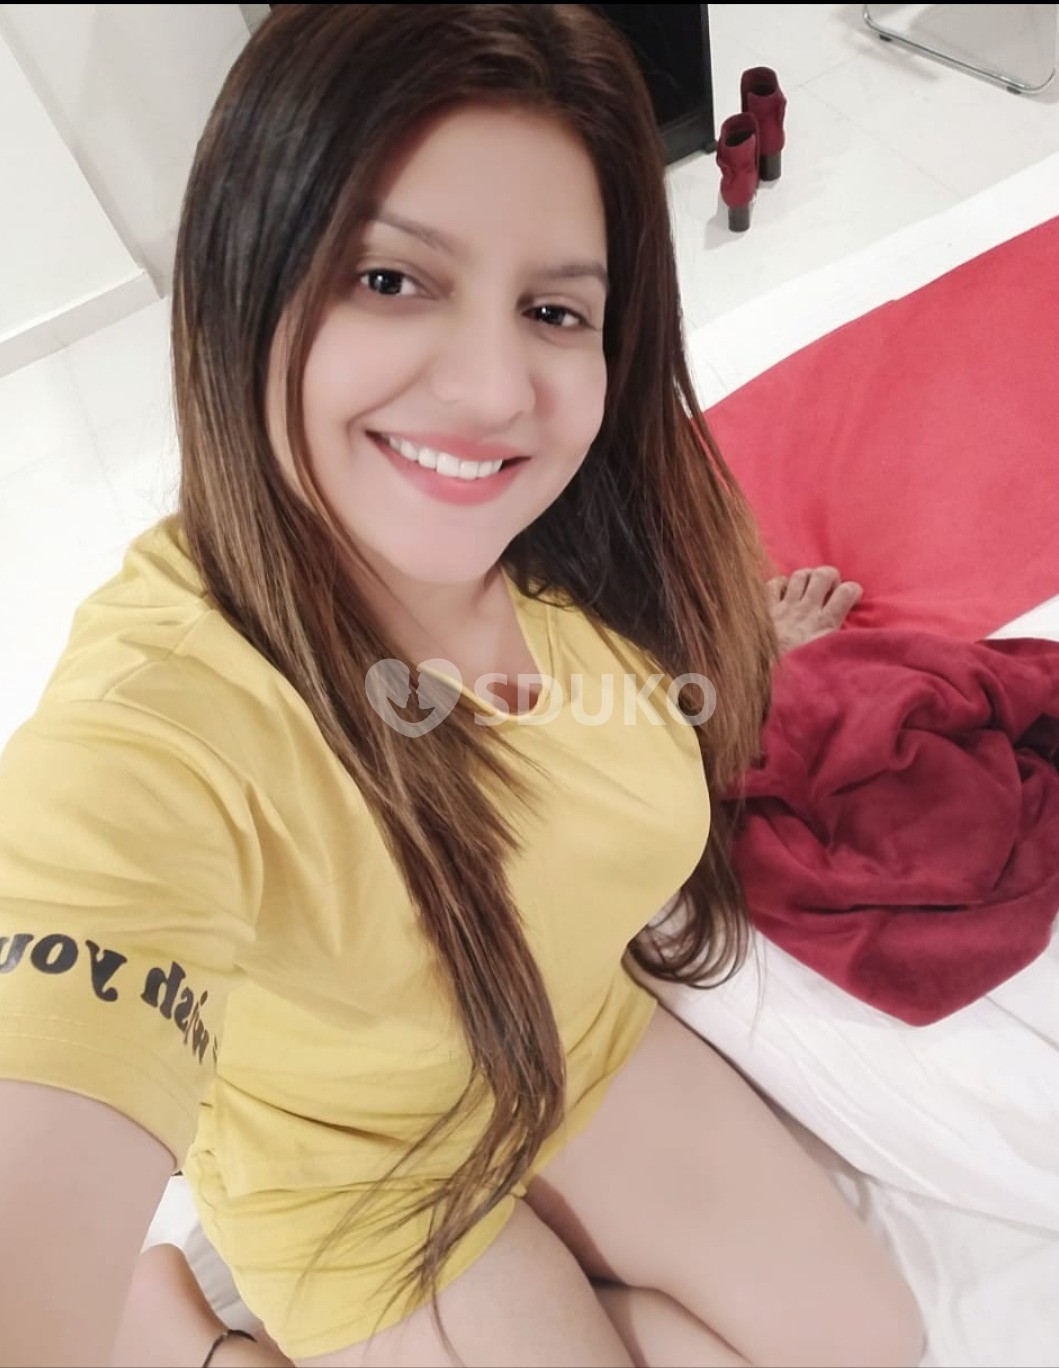 SARJAPUR HOT AND HIGH PROFILE VIP CALL 24 X 7 HRS AVAILABLE ANAL ORAL BLOWJOB AVAILABLE ANYTIME CALL ME